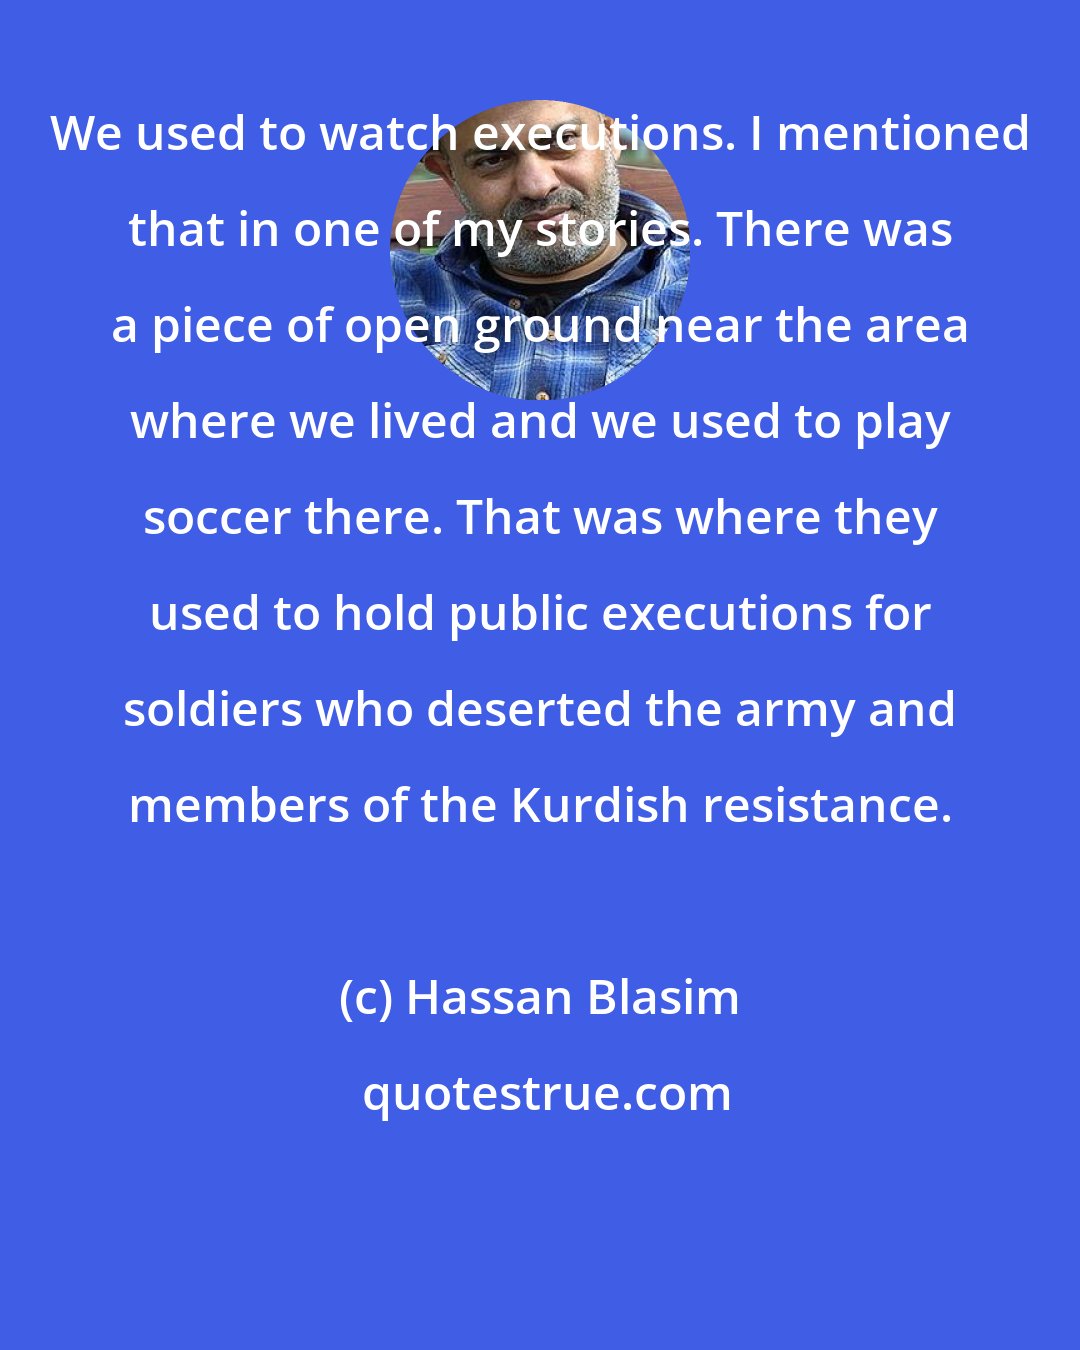 Hassan Blasim: We used to watch executions. I mentioned that in one of my stories. There was a piece of open ground near the area where we lived and we used to play soccer there. That was where they used to hold public executions for soldiers who deserted the army and members of the Kurdish resistance.